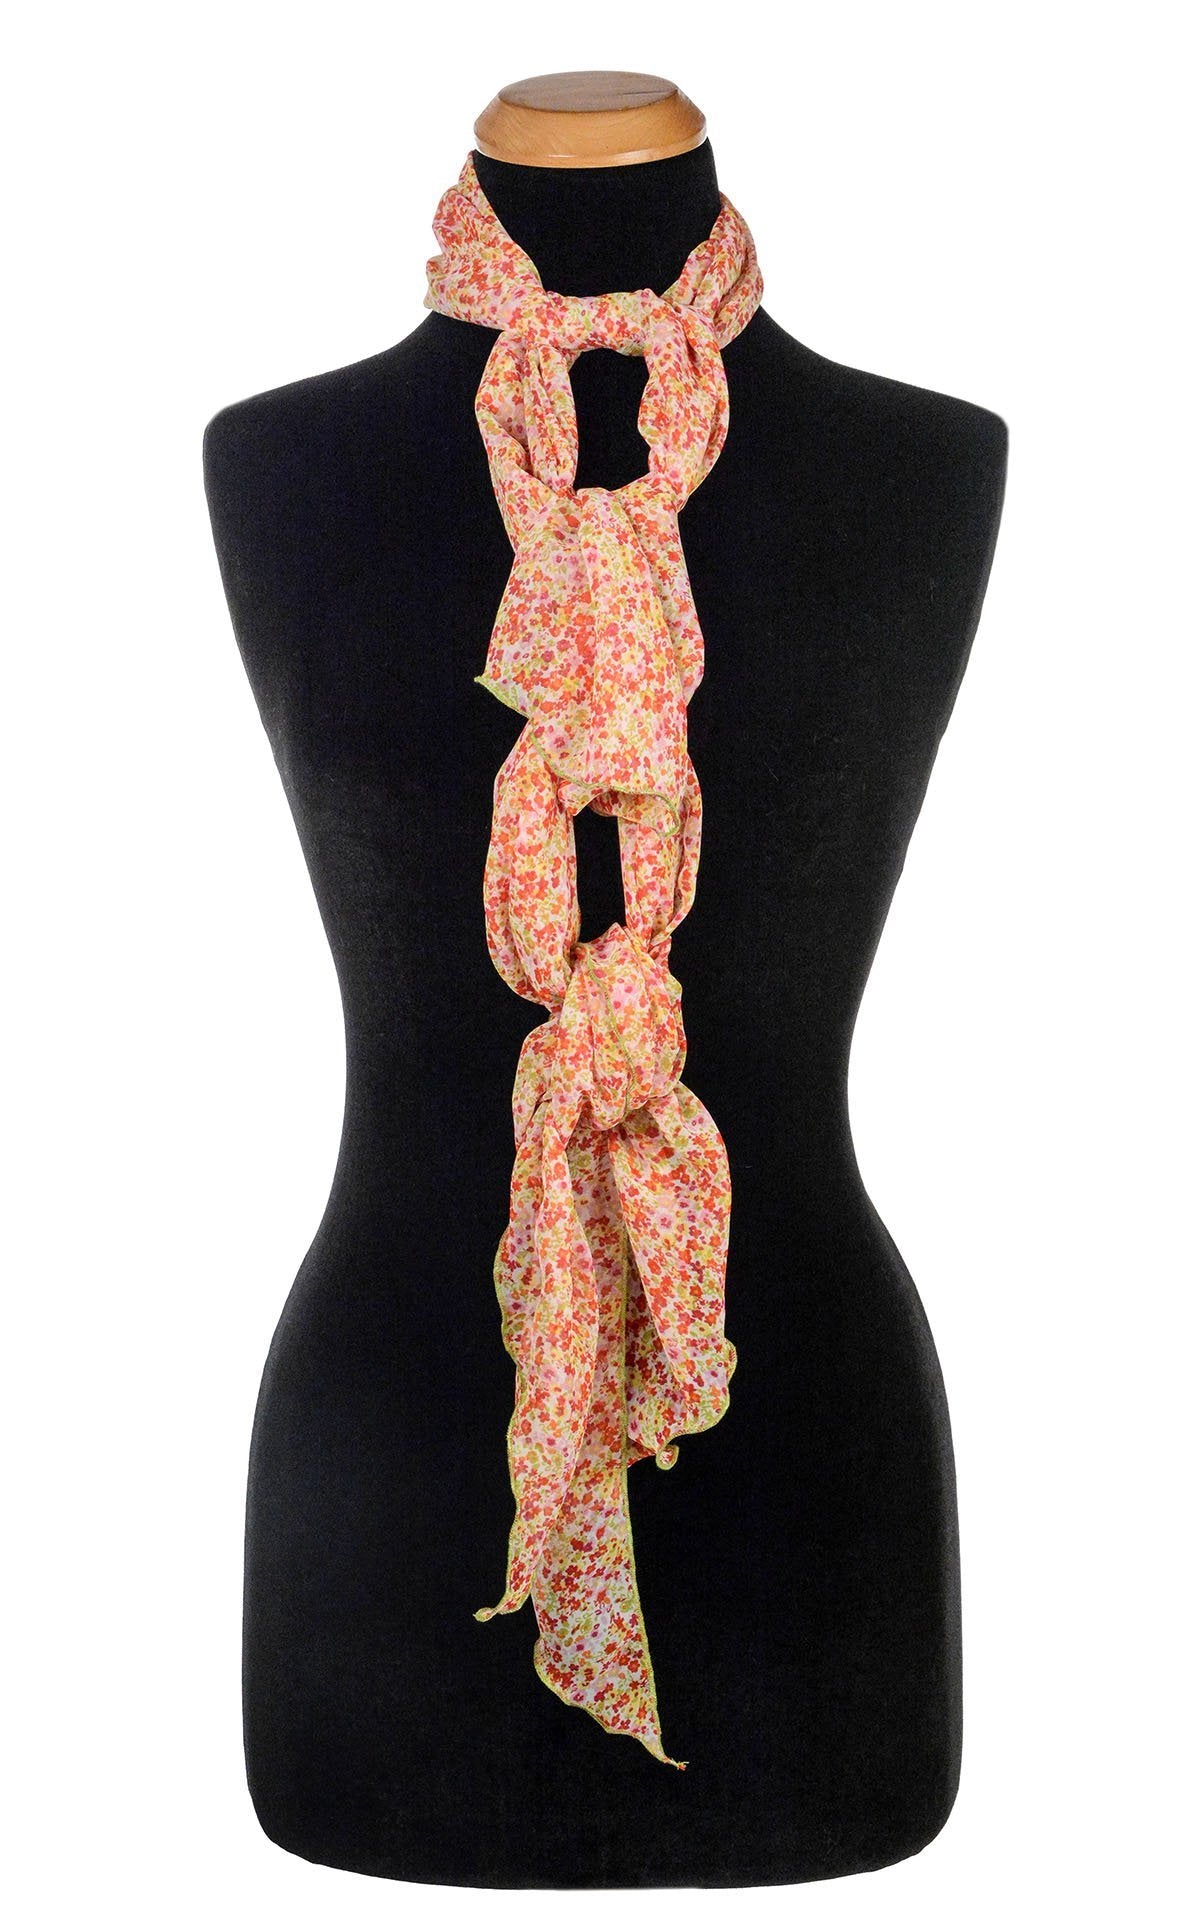 Women’s Large Handkerchief Scarf, Wrap on Mannequin shown knotted up | Summer Daze floral Chiffon, lime green, red, yellow, and cream| Handmade in Seattle WA | Pandemonium Millinery